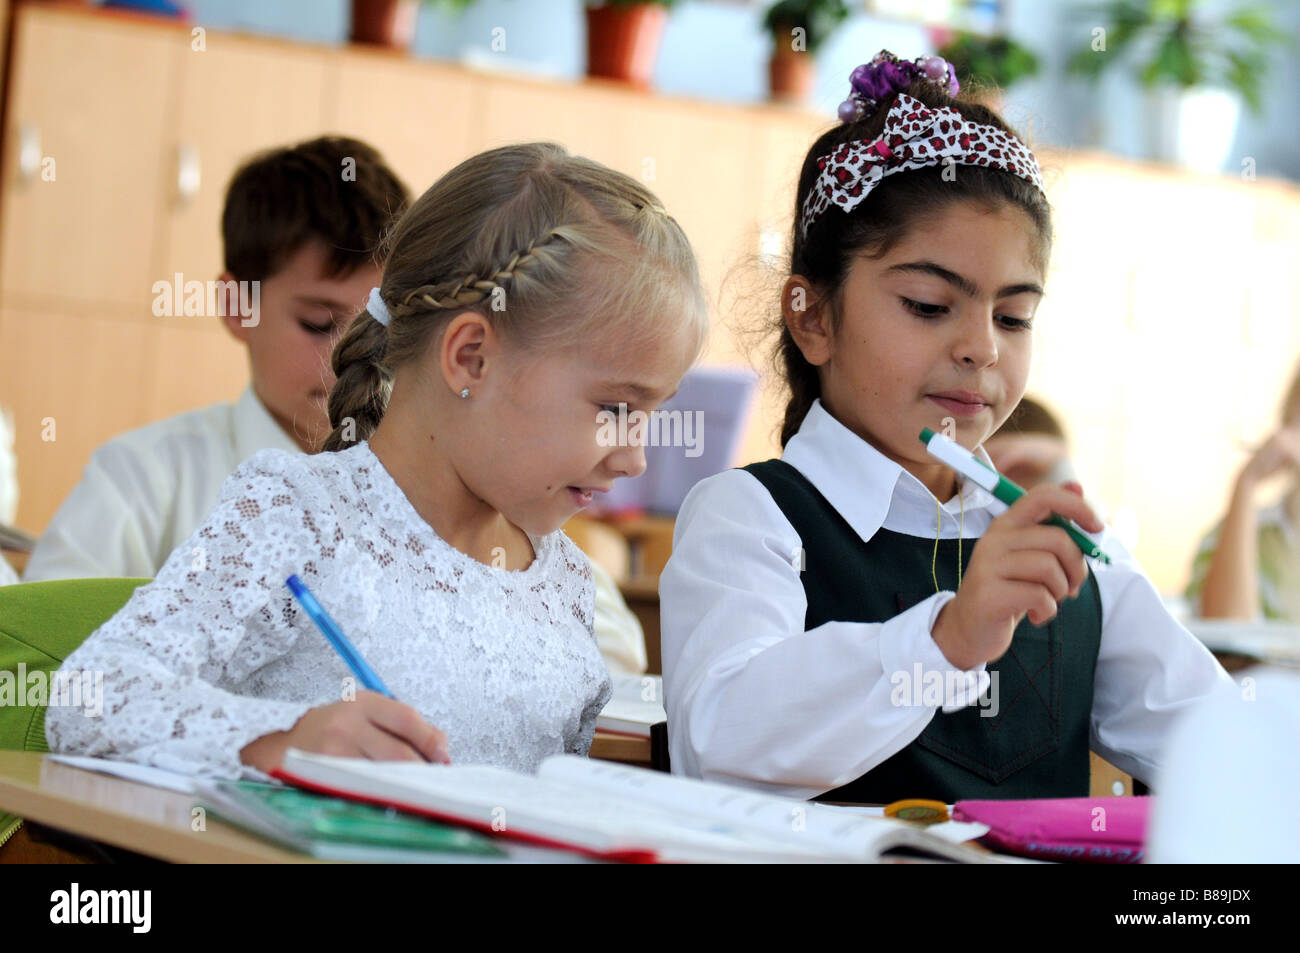 Two schoolgirls in a multicultural classroom. On the left a Christian Ukrainian girl, on the right a Muslim Tatar girl. Stock Photo